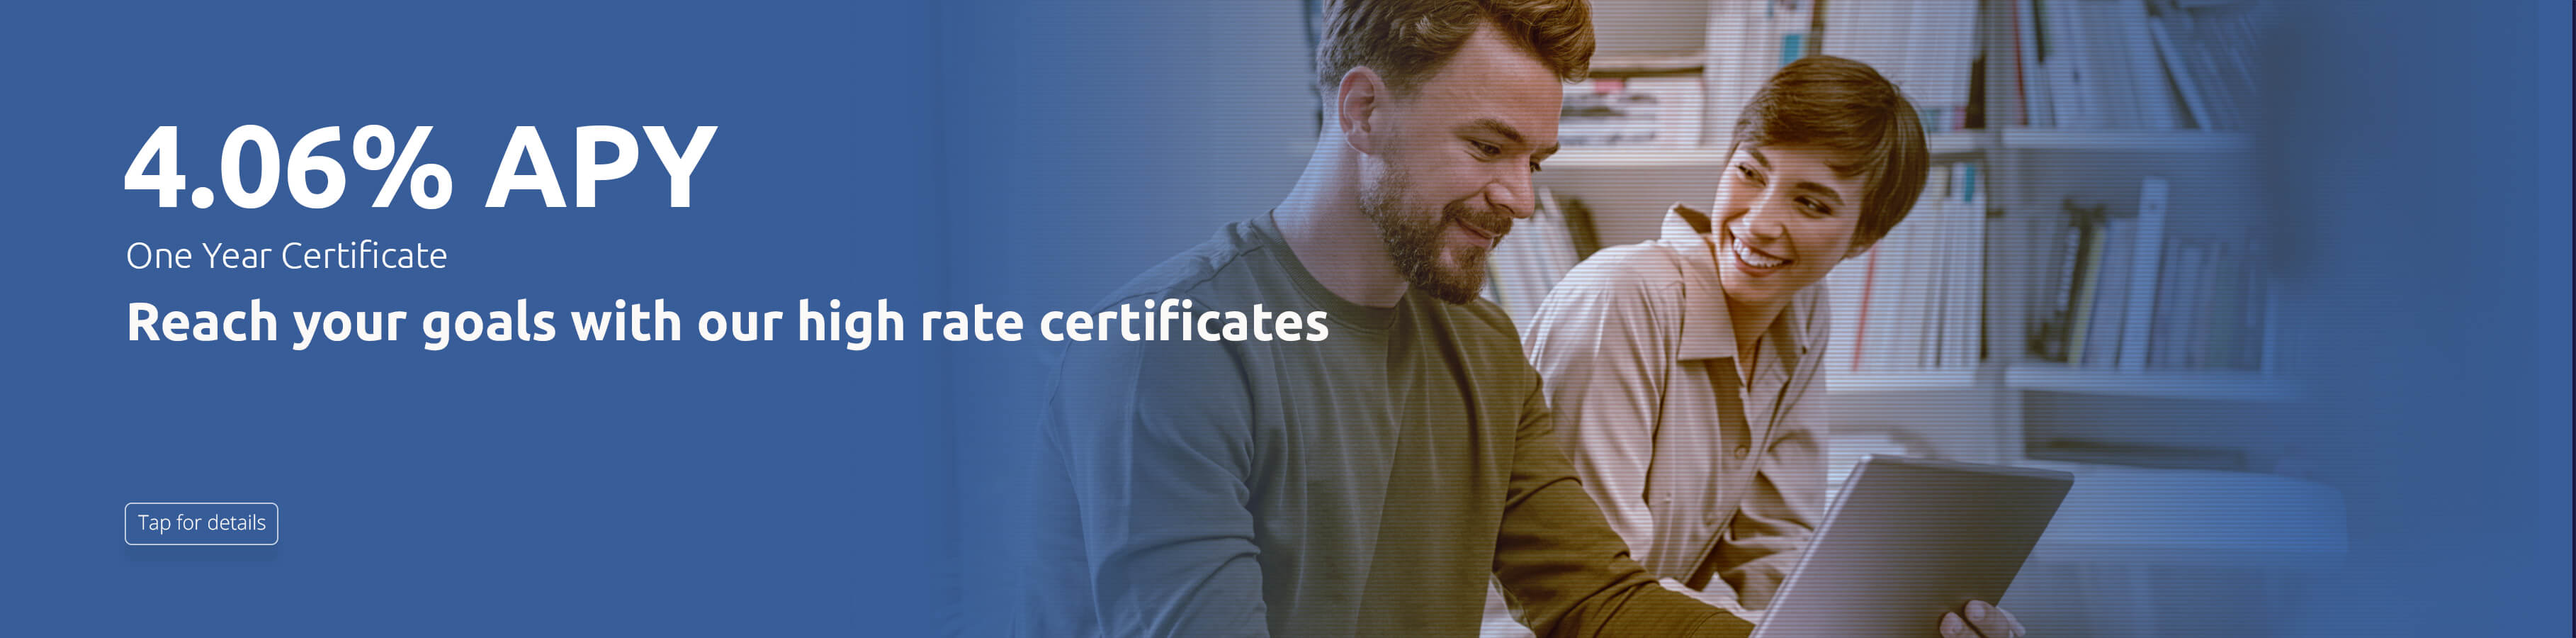 4.06%APY One year Certificate. Reach your goals with our high rate certificates. Tap for details 